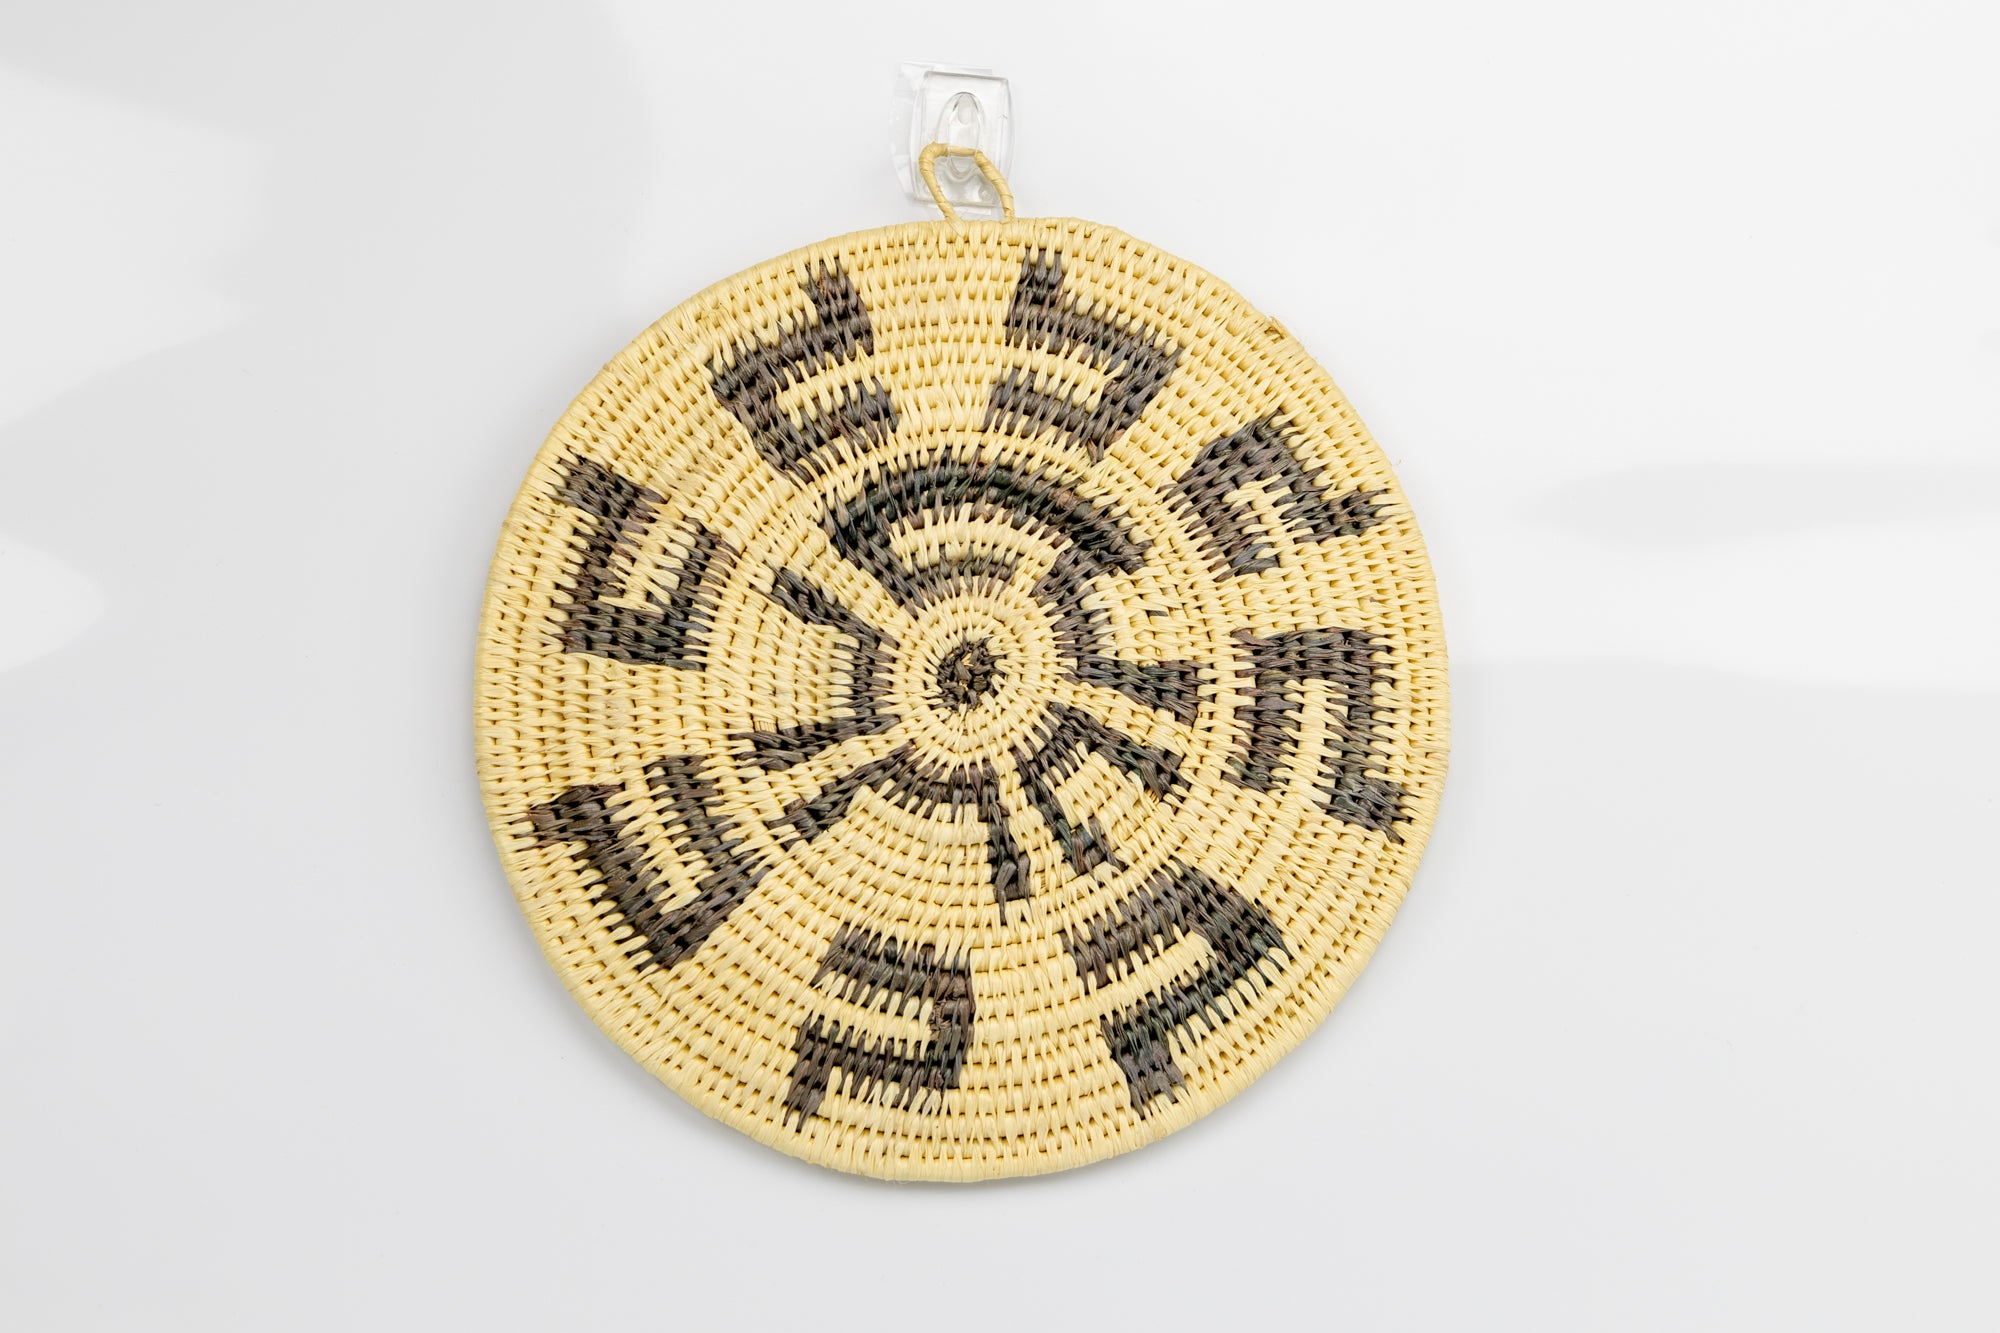 Hand woven plate basket from Panama. gray and white colors. Wall decoration. Indigenous artists Panama.